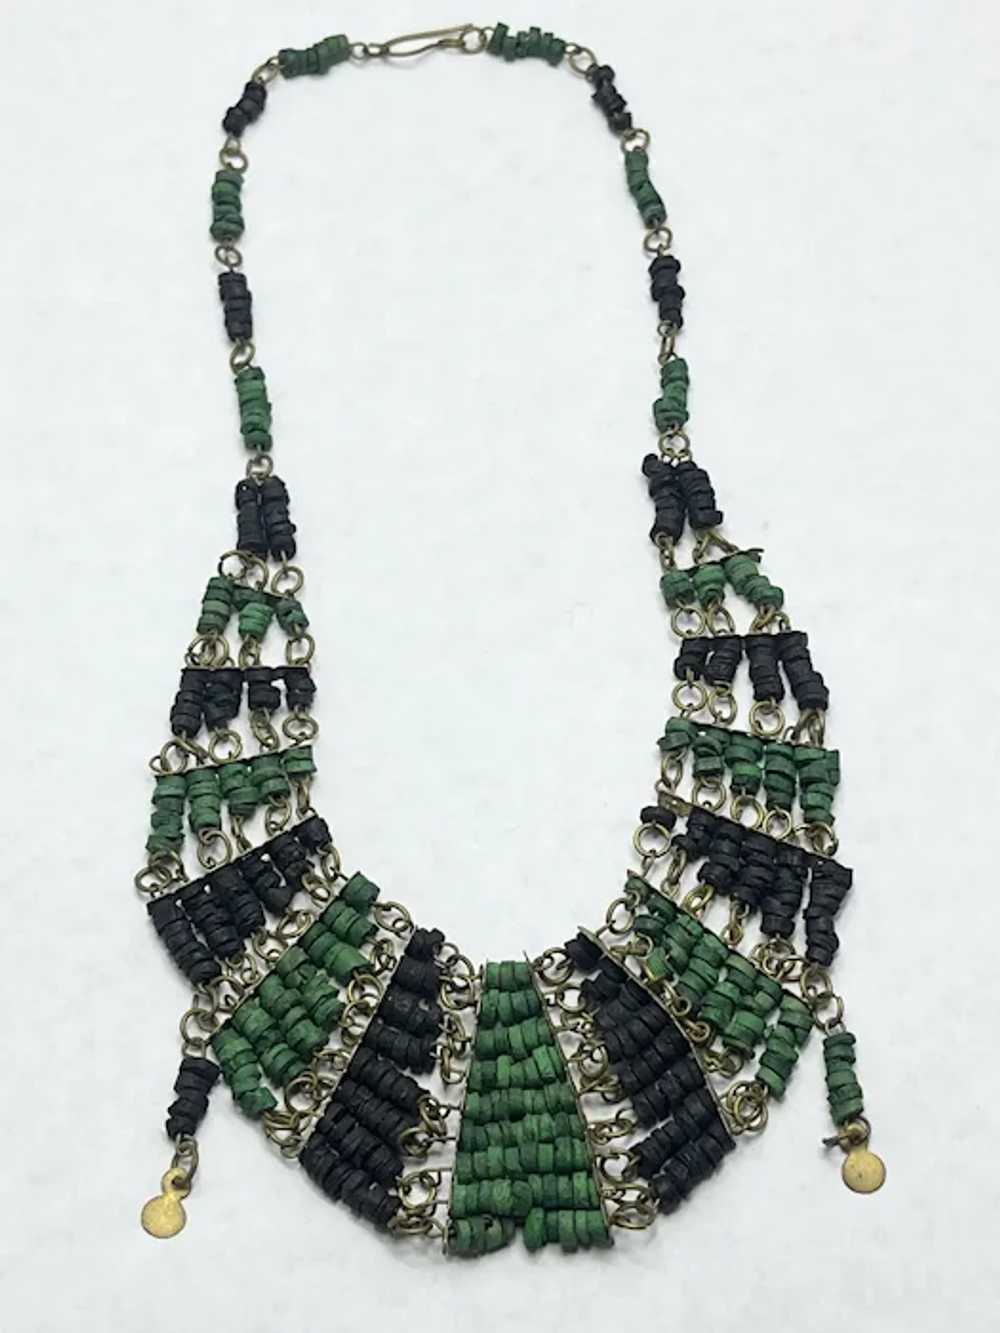 Vintage Egyptian Revival Faience Beaded Necklace - image 2